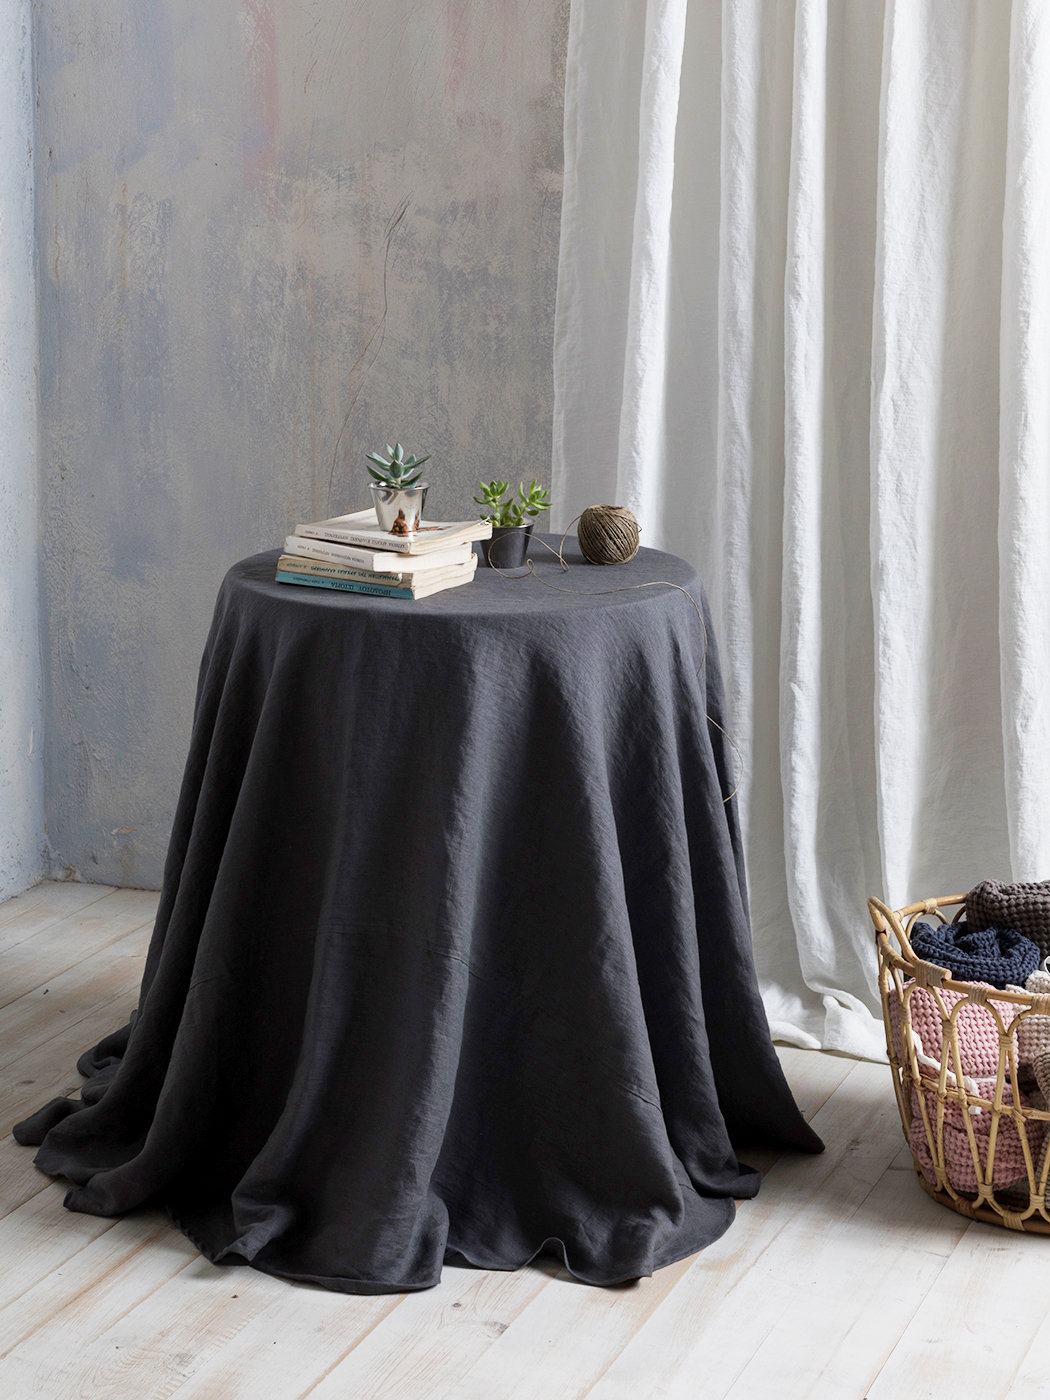 Linen tablecloth-Round Linen tablecloth-Extra Large Round Tablecloth in  Dark grey- Table linens-Tablecloth-Washed Linen tableloth.